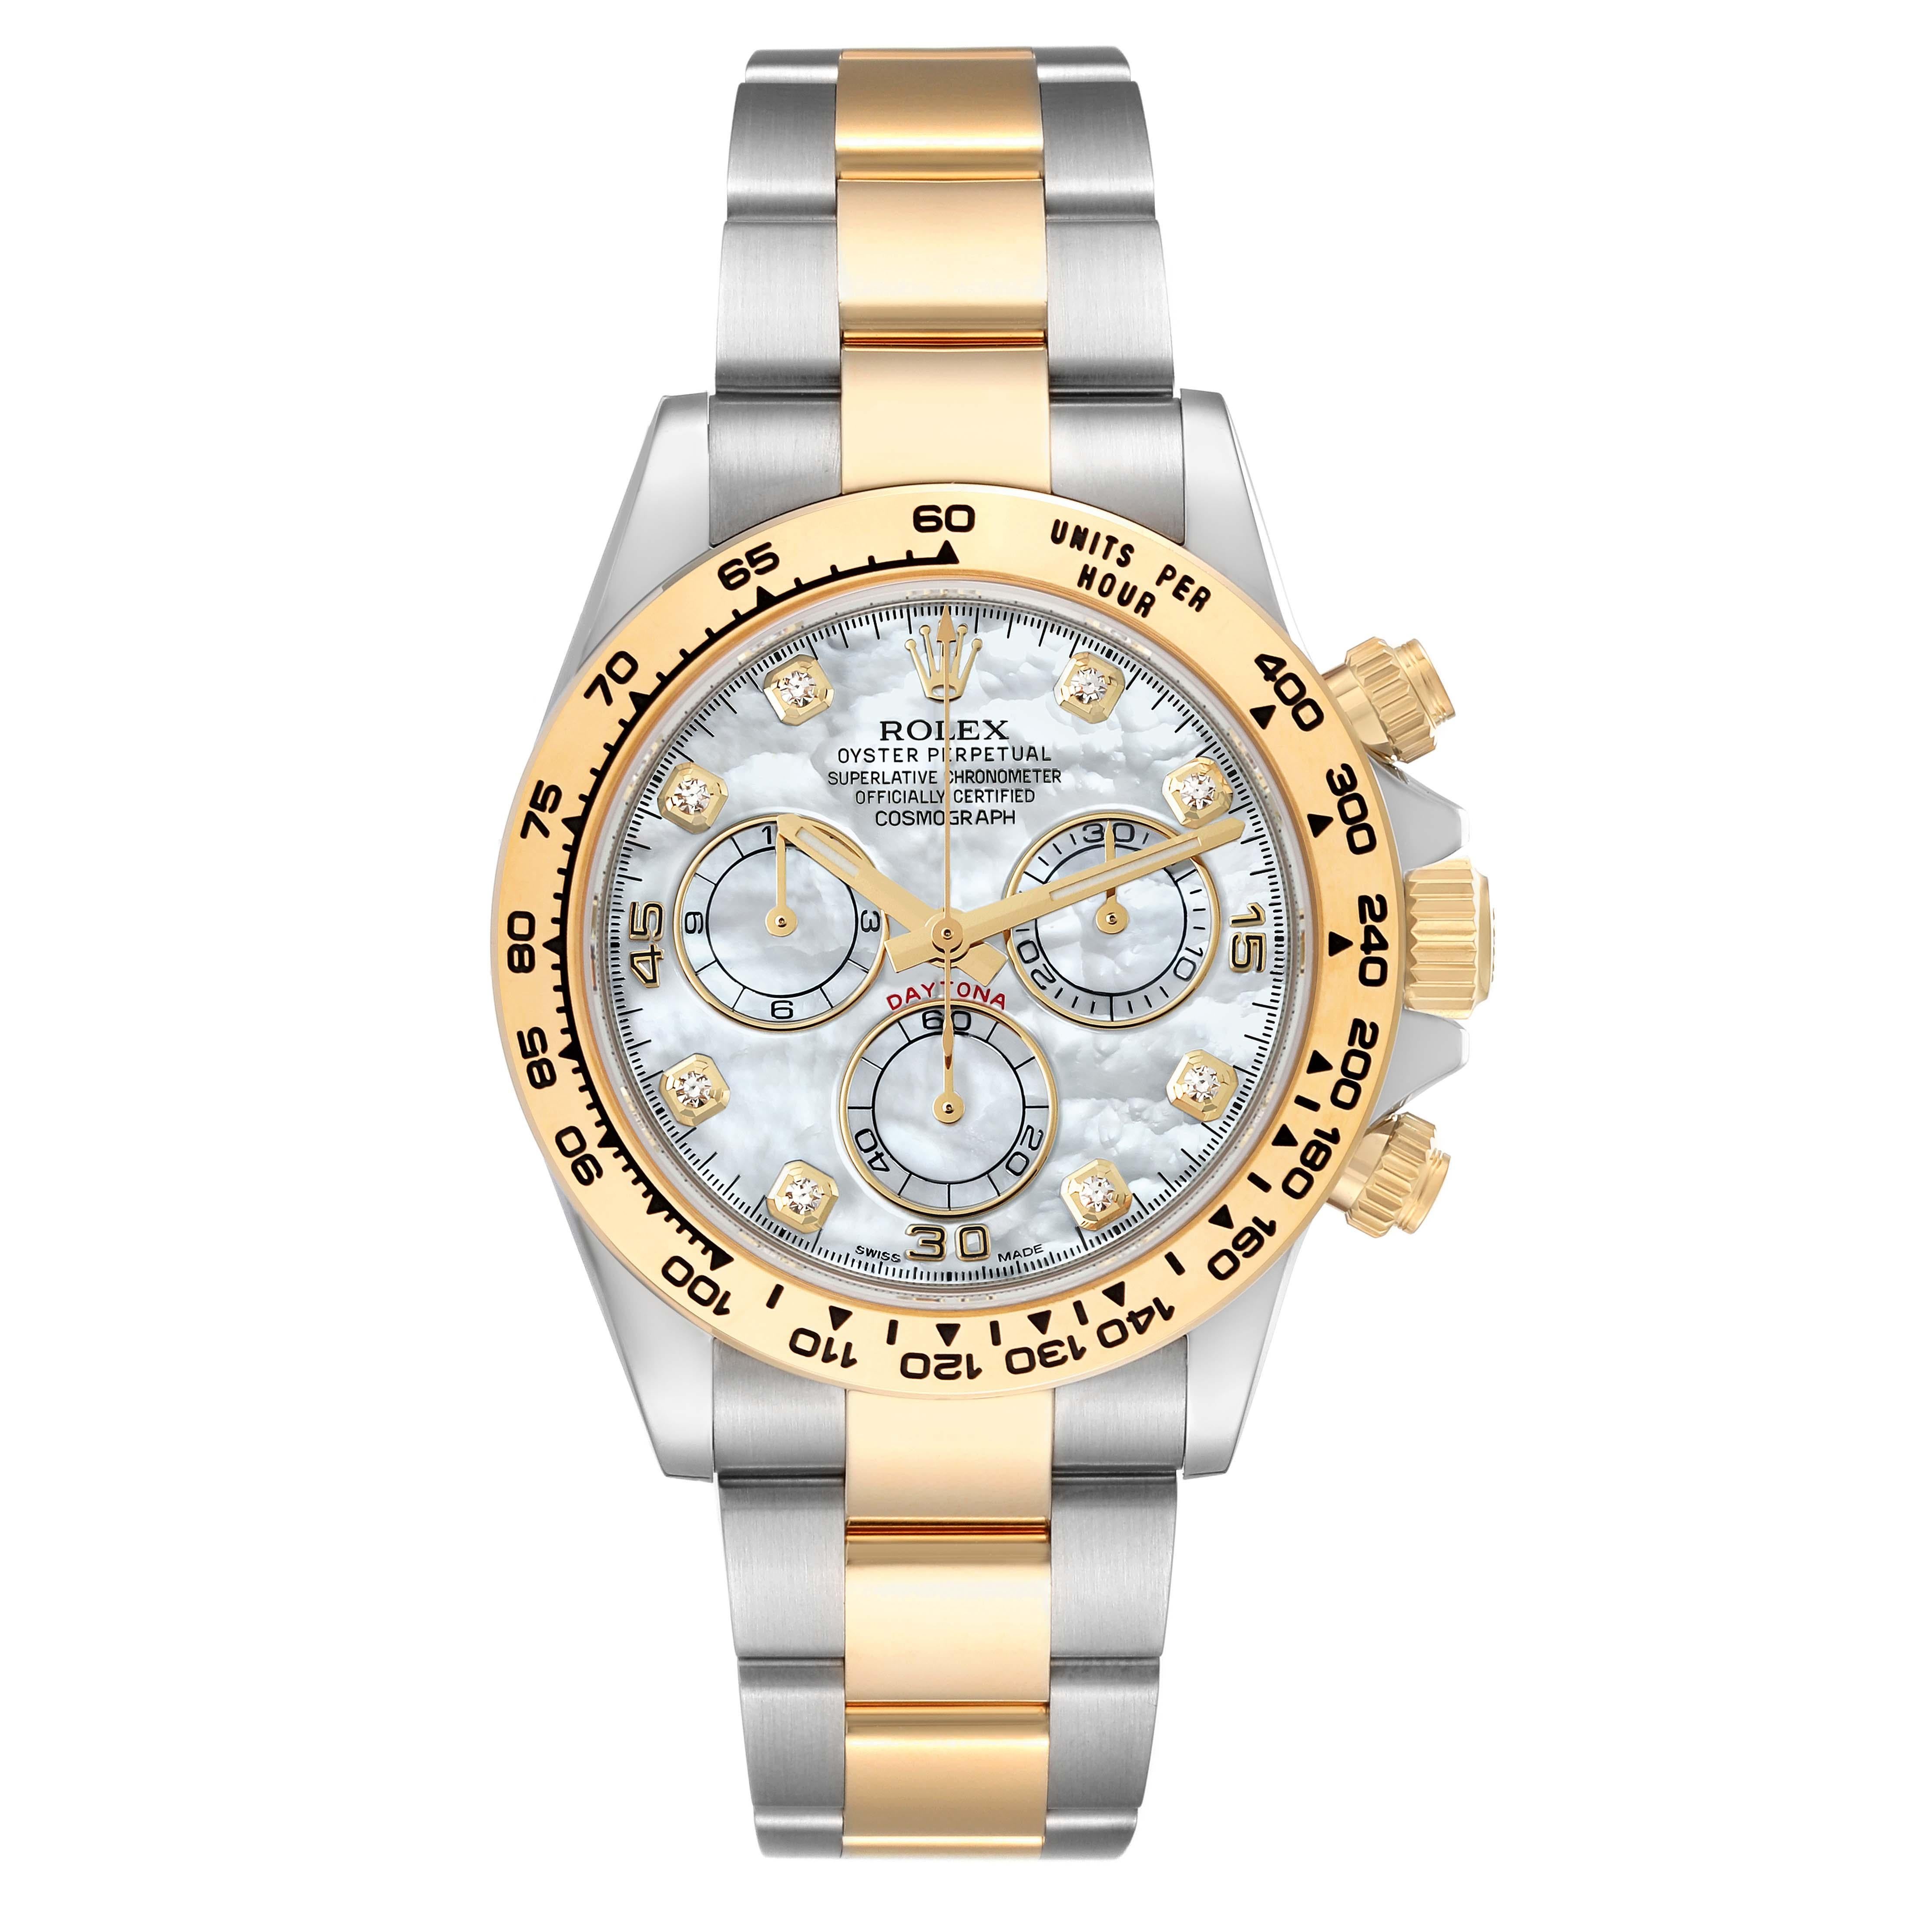 Rolex Daytona Steel Yellow Gold Mother Of Pearl Diamond Mens Watch 116503 Box Card. Officially certified chronometer self-winding movement. Rhodium-plated, oeil-de-perdrix decoration, straight line lever escapement, monometallic balance adjusted to